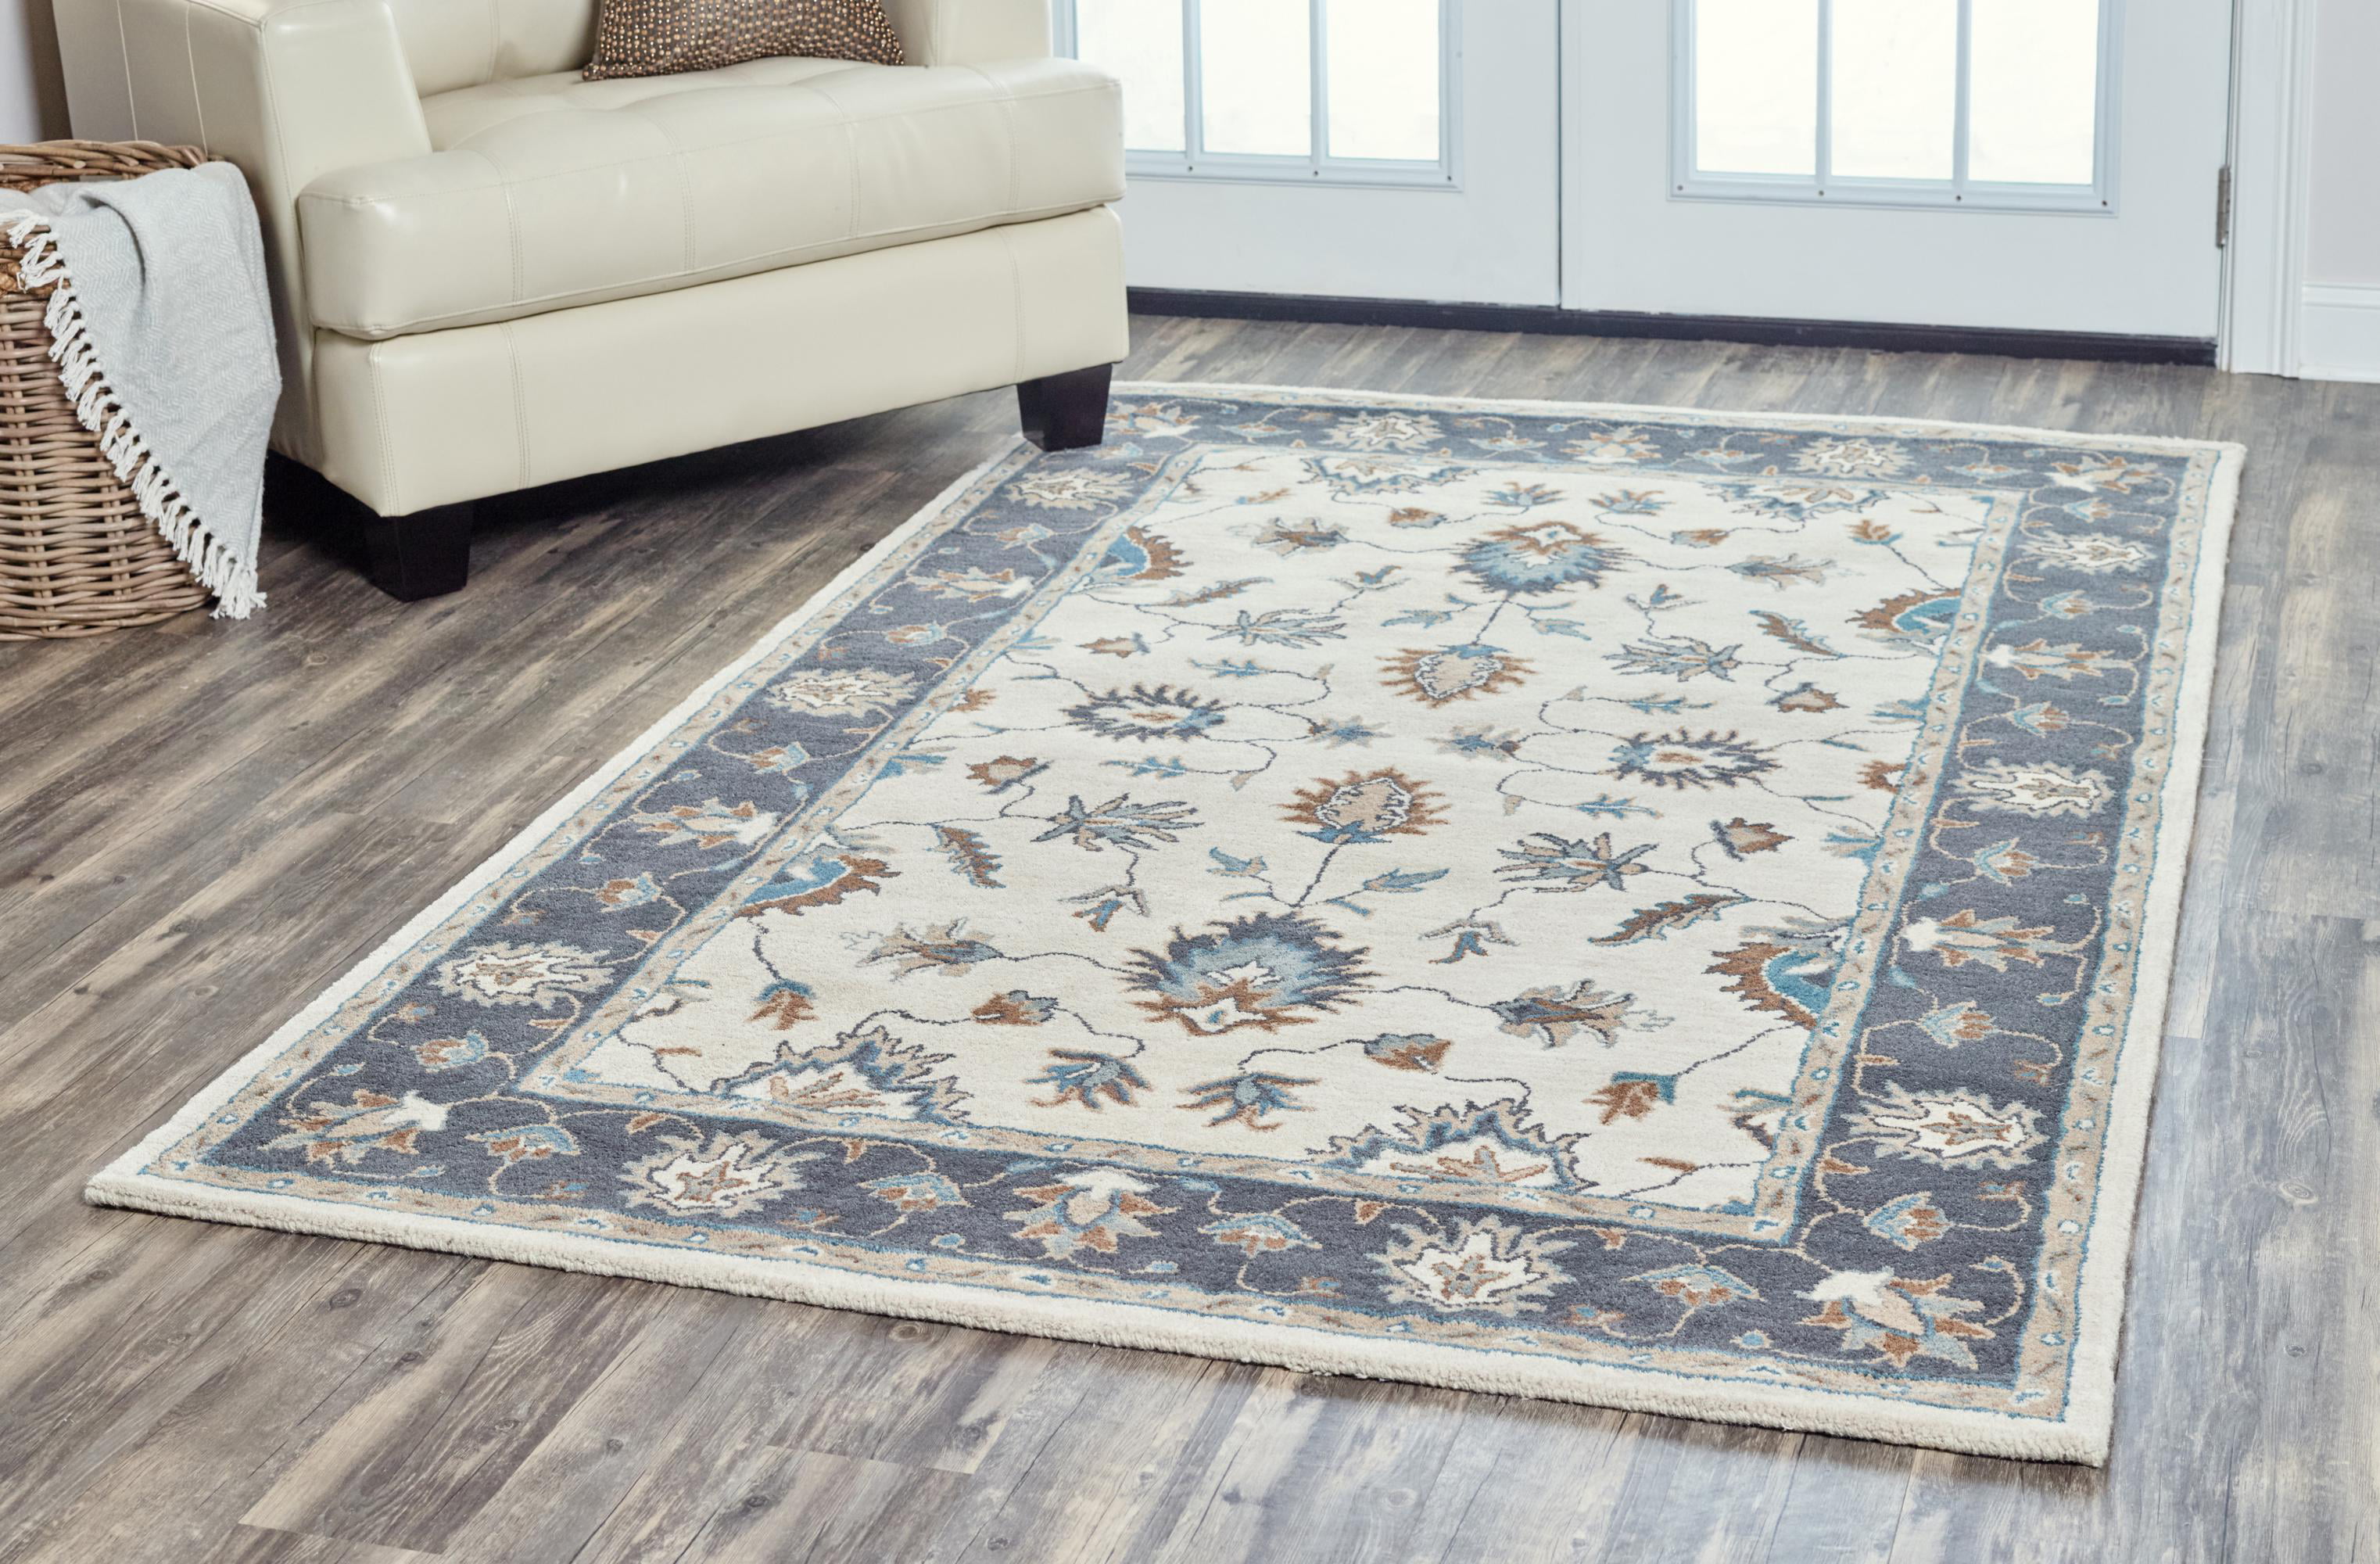 Walmart 9x12 Area Rugs - How To Blog